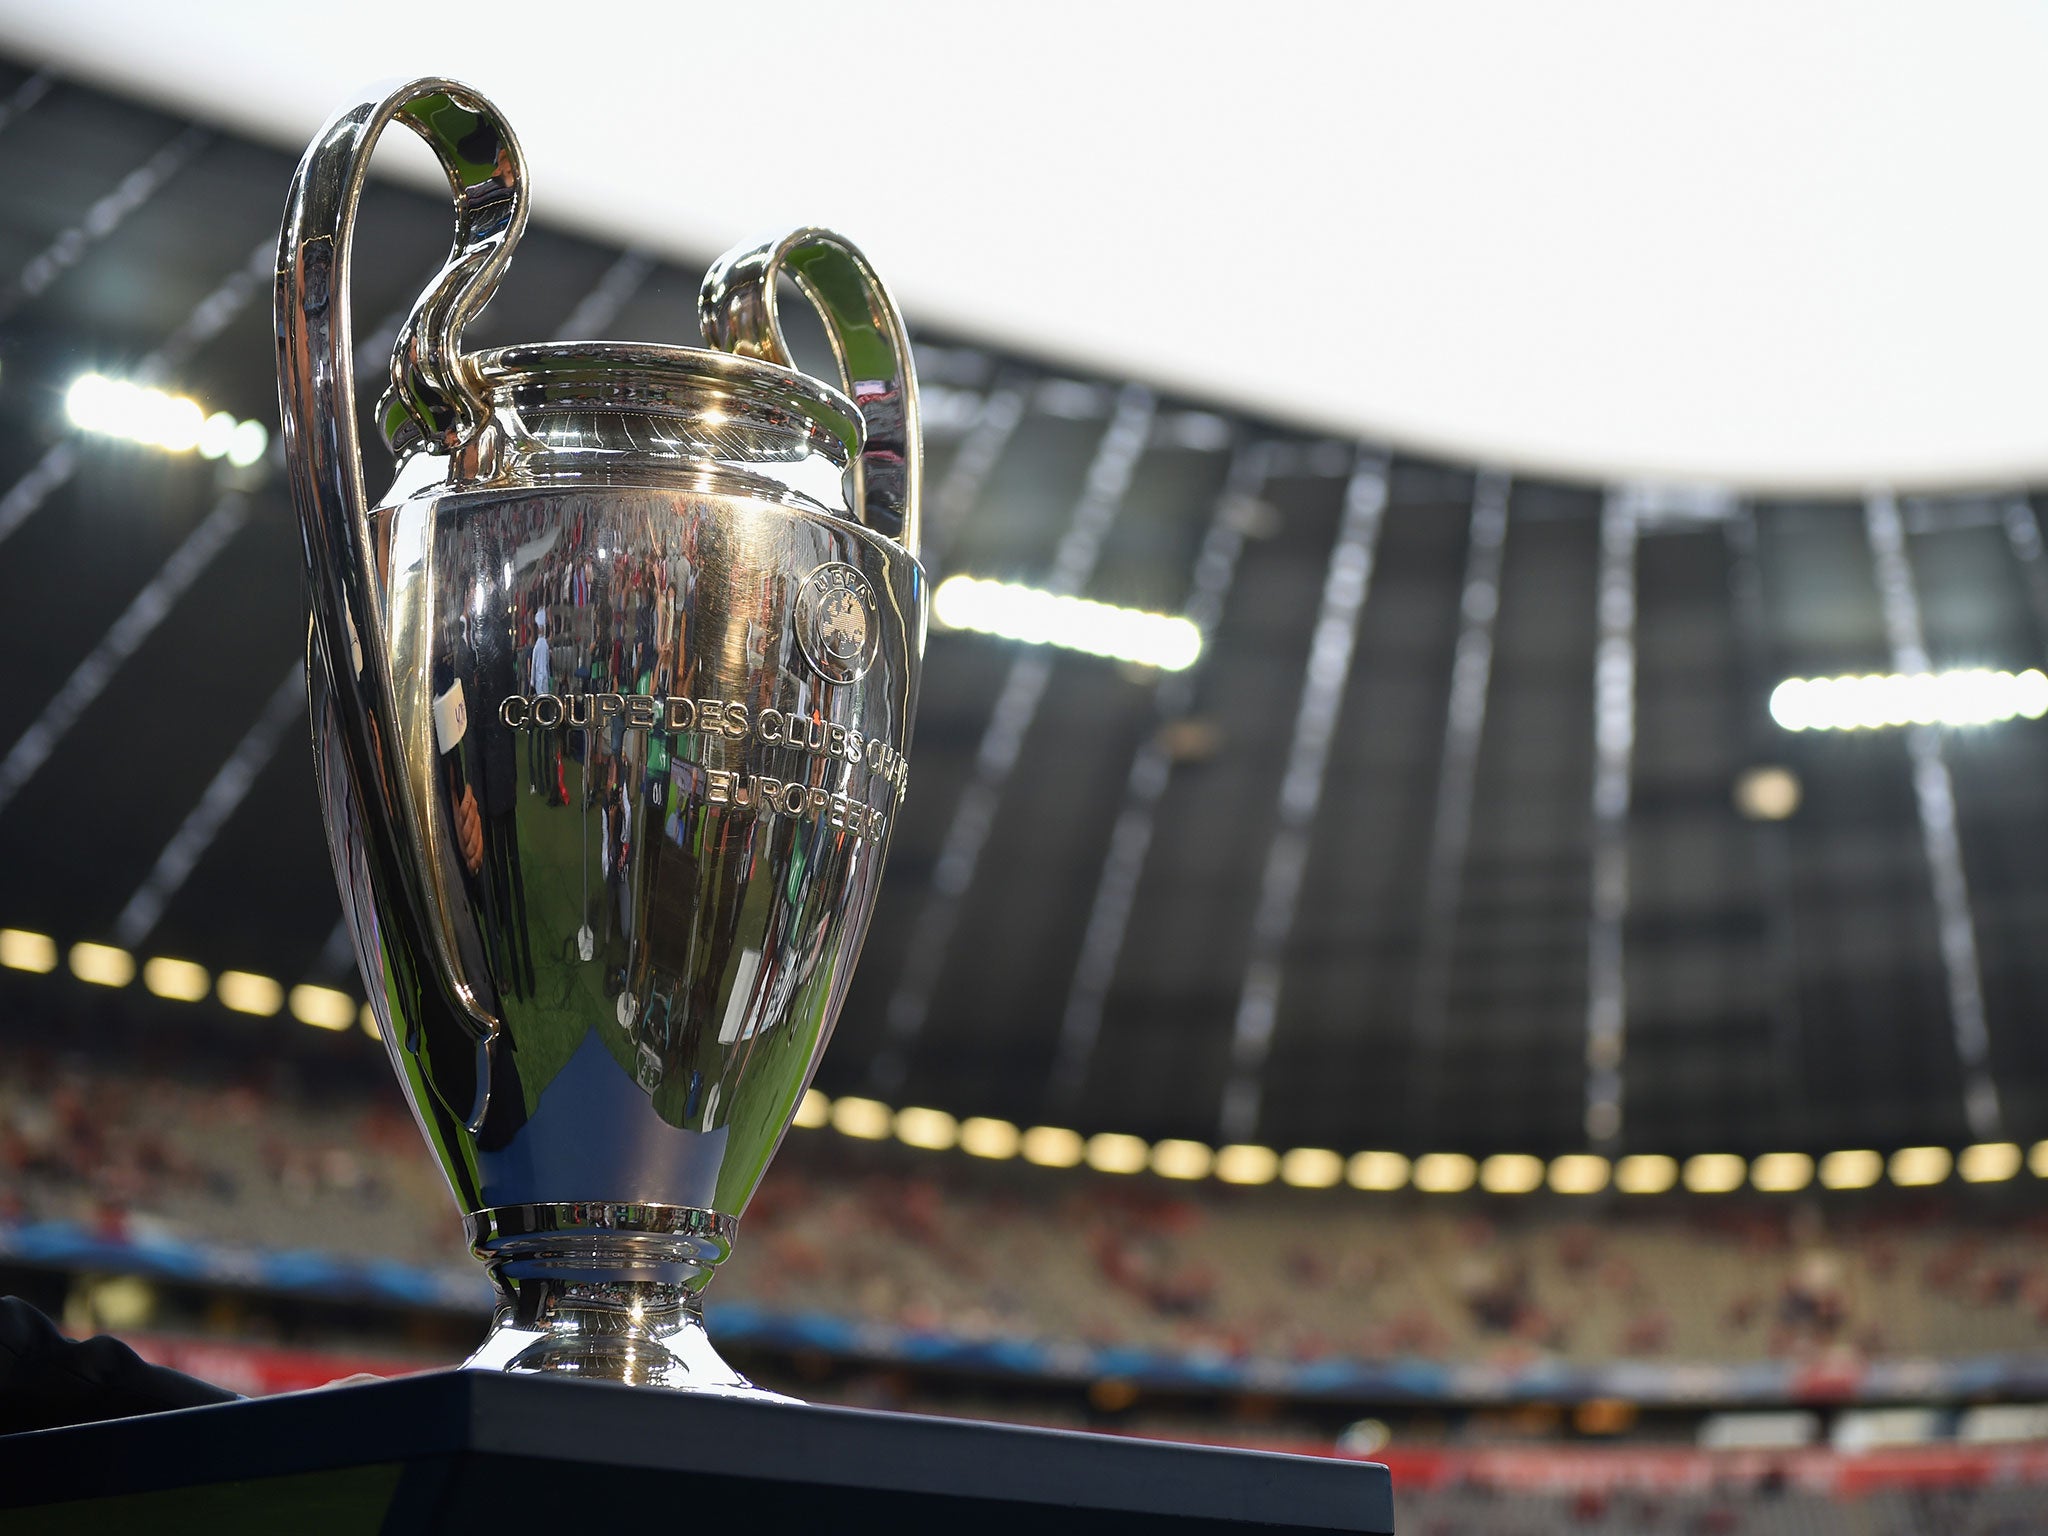 A view of the Champions League trophy at the Allianz Arena last season